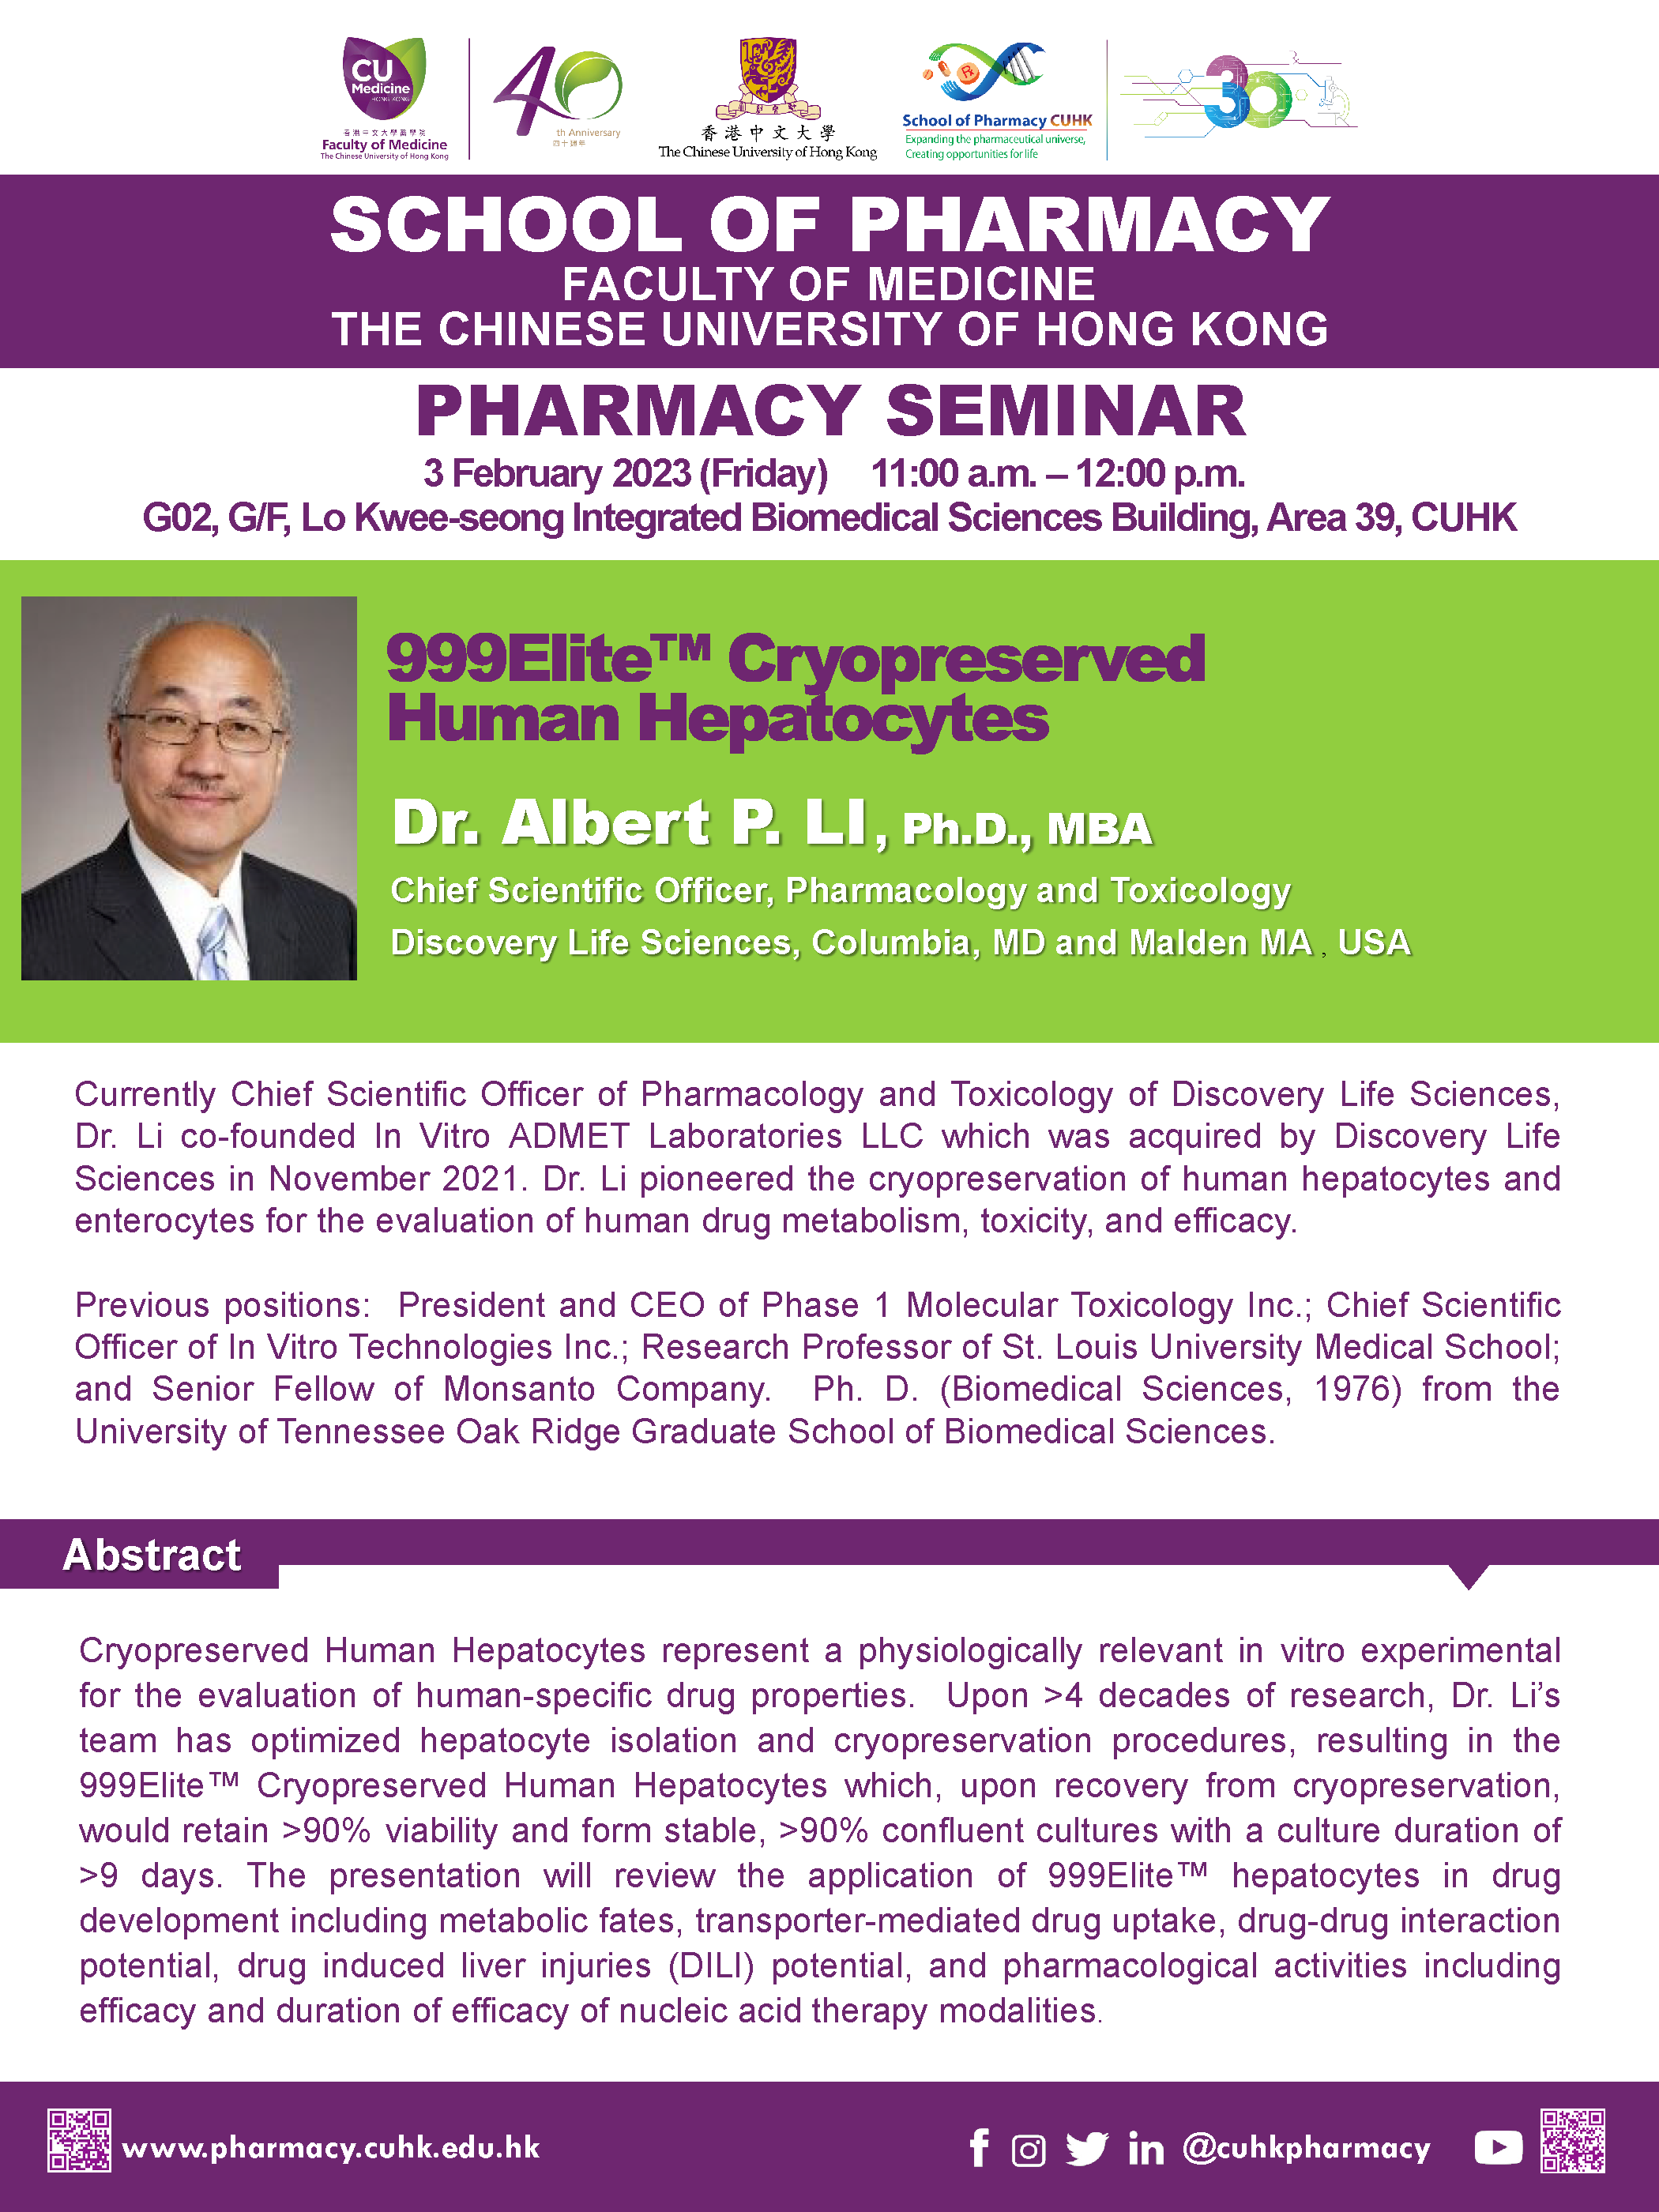 “999Elite™ Cryopreserved   Human Hepatocytes” by Dr. Albert Li from Discovery Life Sciences, Columbia, USA